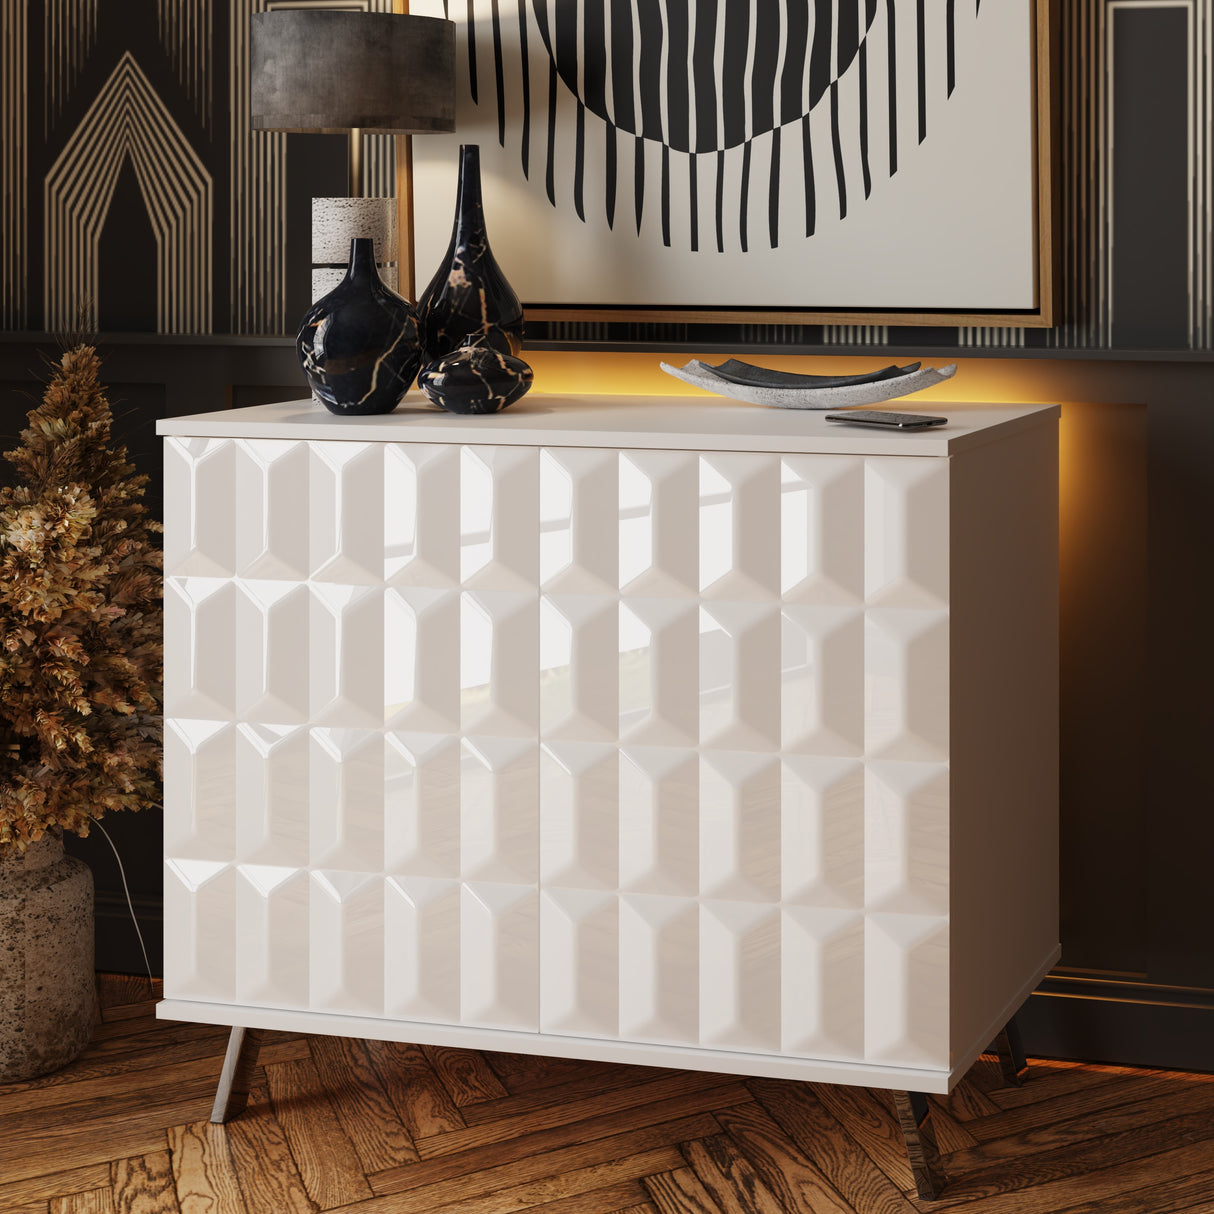 Frank Olsen Elevate White Small Sideboard with Mood Lighting & Wireless Phone Charging